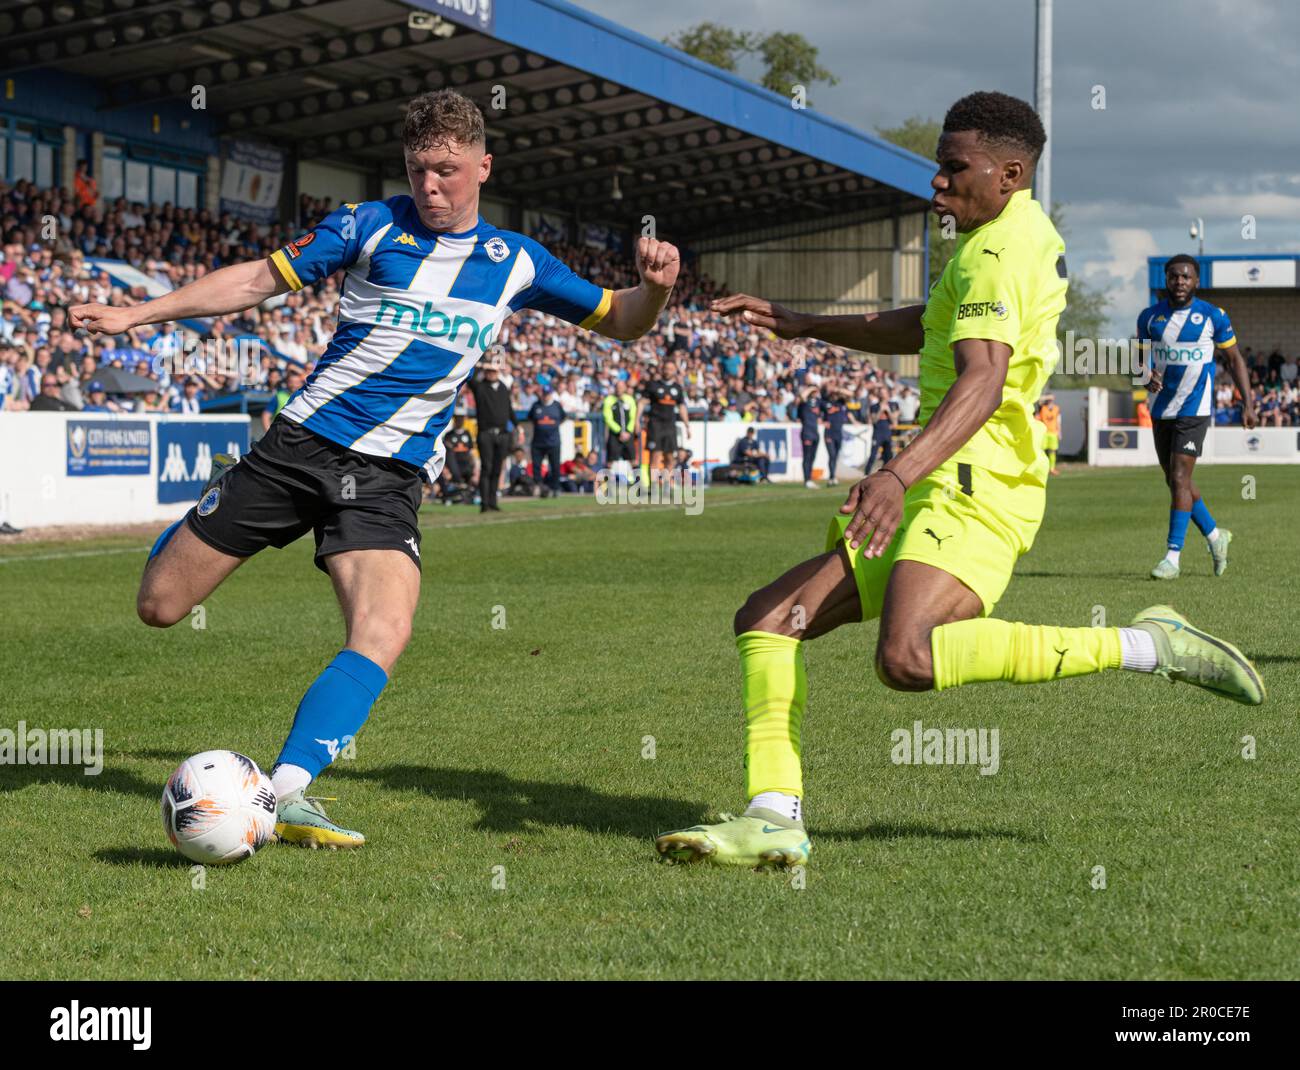 Deva Stadium, Chester, Cheshire, England, 7th May 2023. Chester's Charlie Caton cuts inside to cross the ball, during Chester Football Club V Brackley Town Football Club, in the Vanarama National League North Semi-Final Play-Off Credit Image: ©Cody Froggatt Alamy live news) Stock Photo